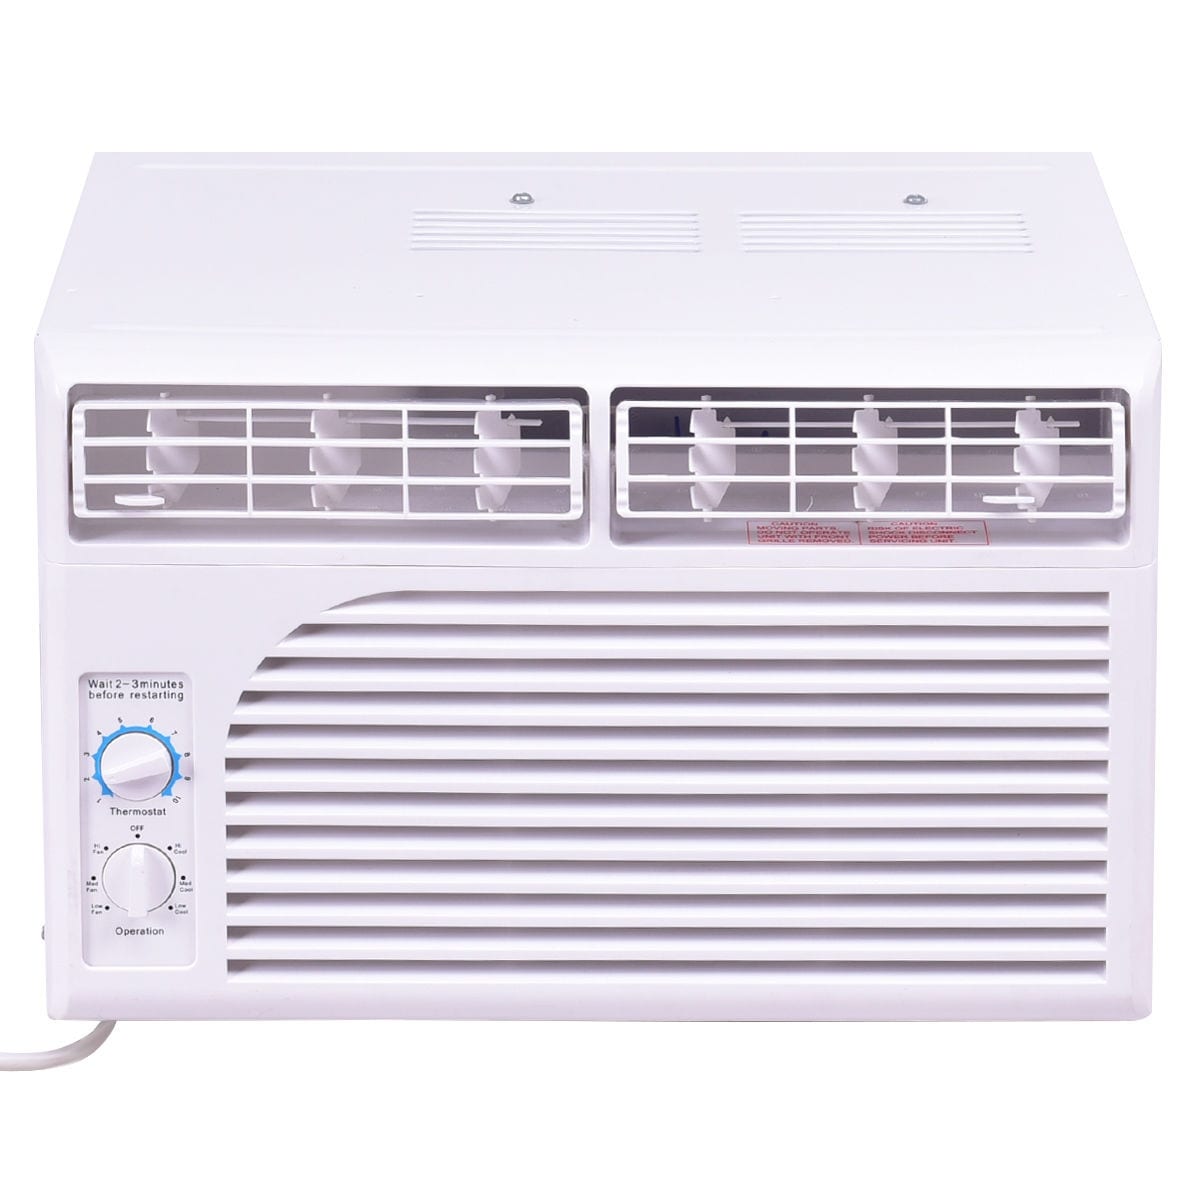 10 Window Air Conditioners You Should Consider - GineersNow